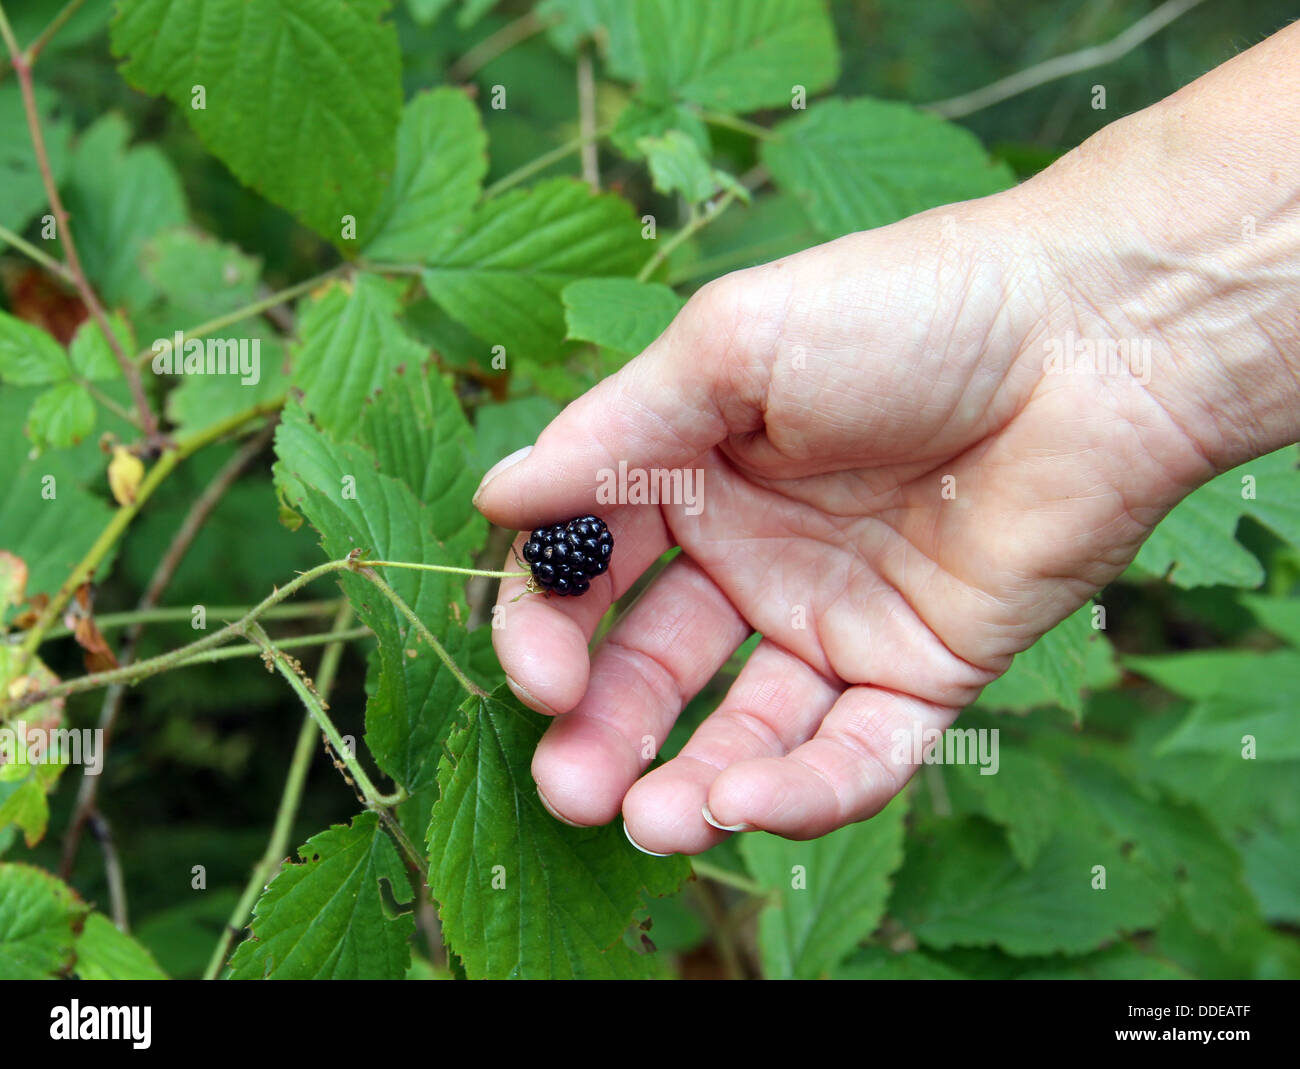 woman picking a ripe blackberry from a berry patch Stock Photo